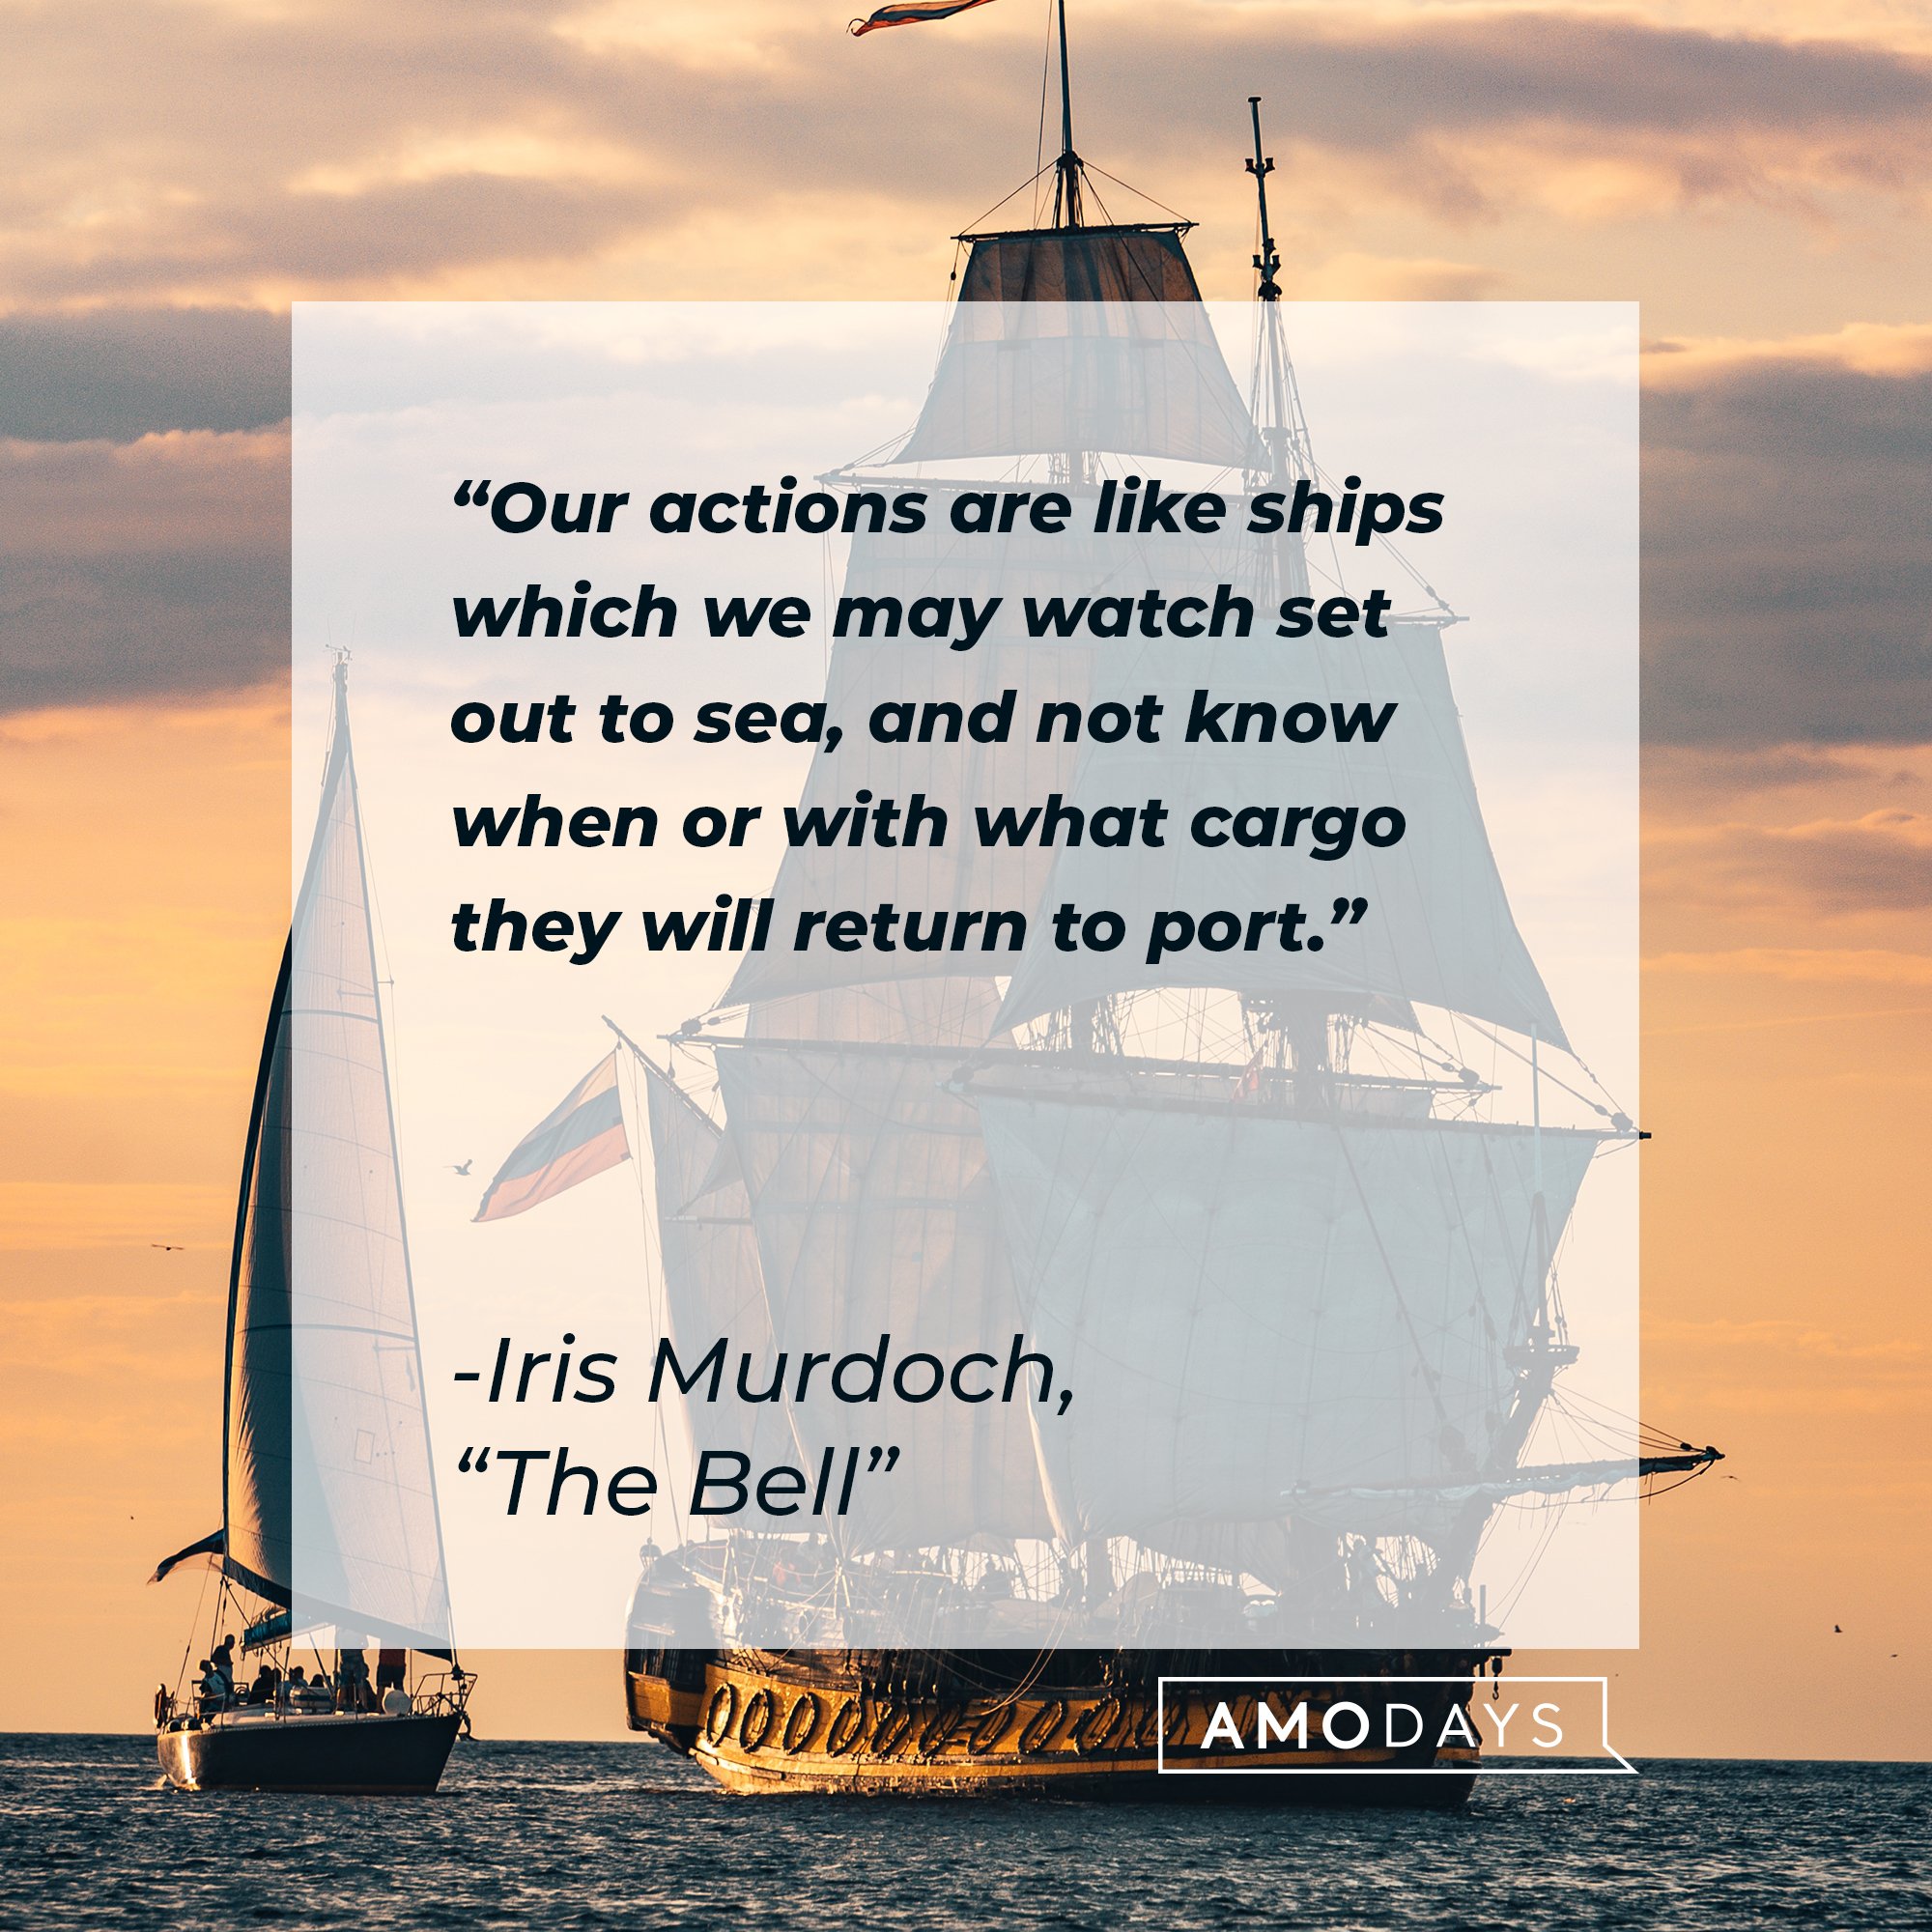 Iris Murdoch’s quotes from, “The Bell”: "Our actions are like ships which we may watch set out to sea, and not know when or with what cargo they will return to port.” | Image: AmoDays 